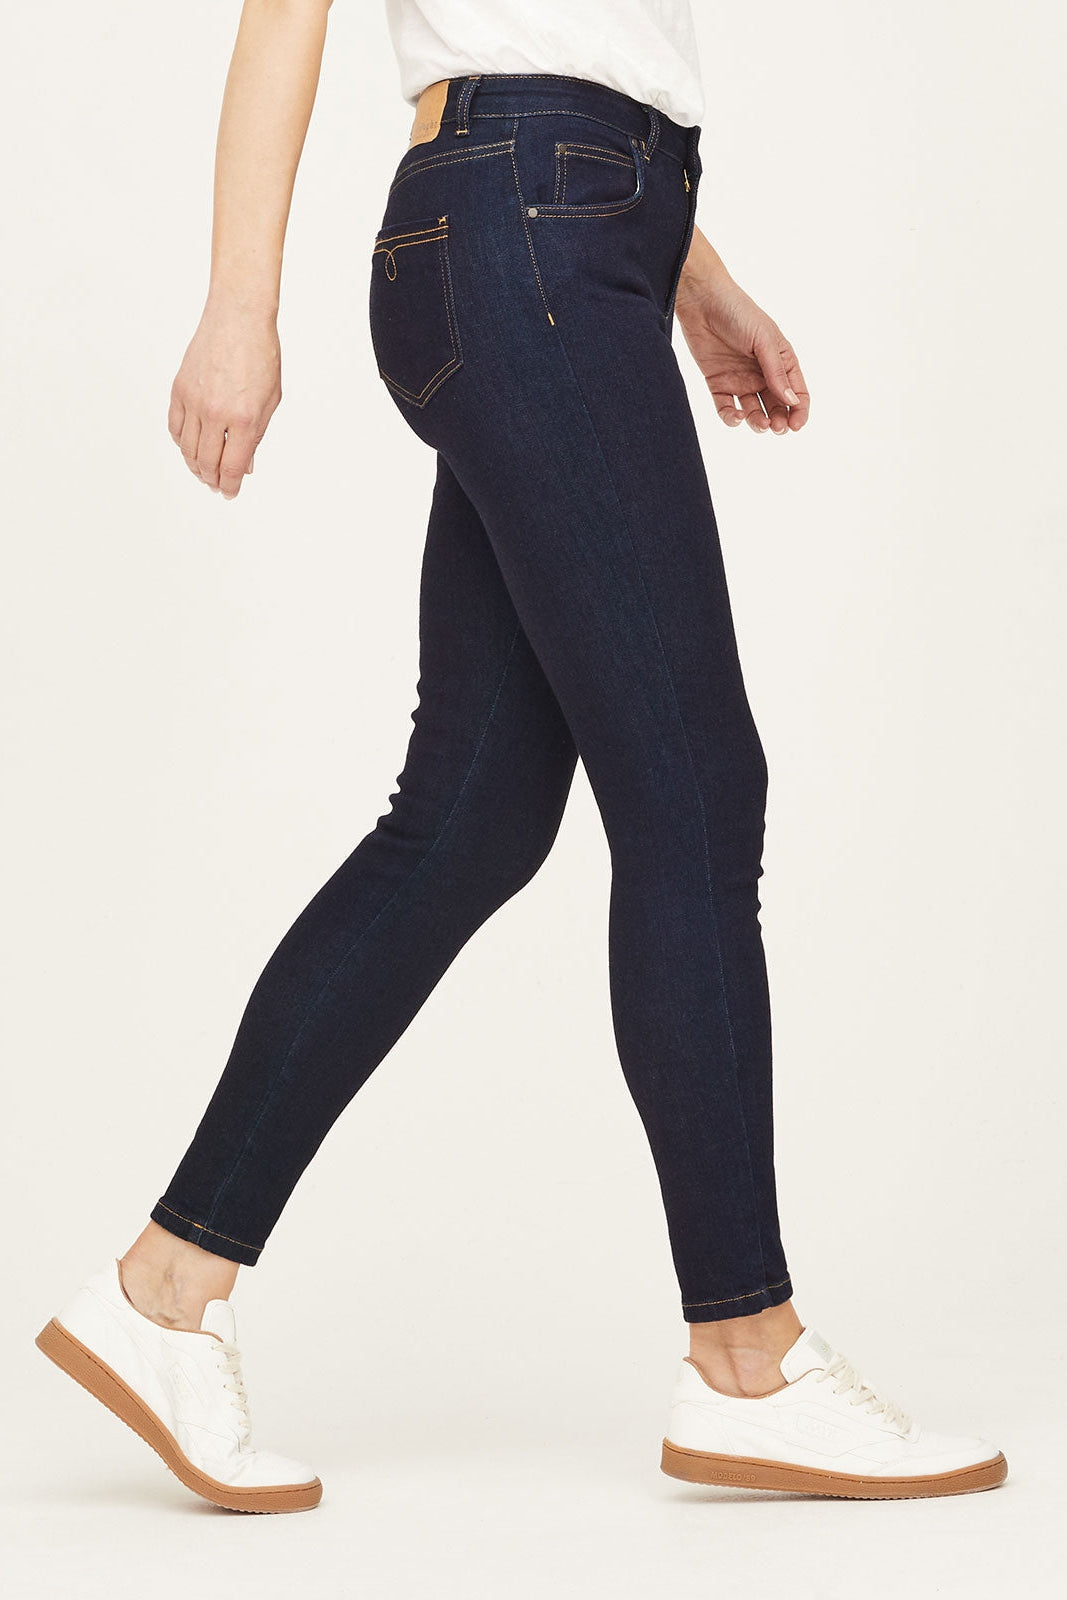 Thought Gots Skinny Jeans in Dark Blue Wash-Womens-Ohh! By Gum - Shop Sustainable